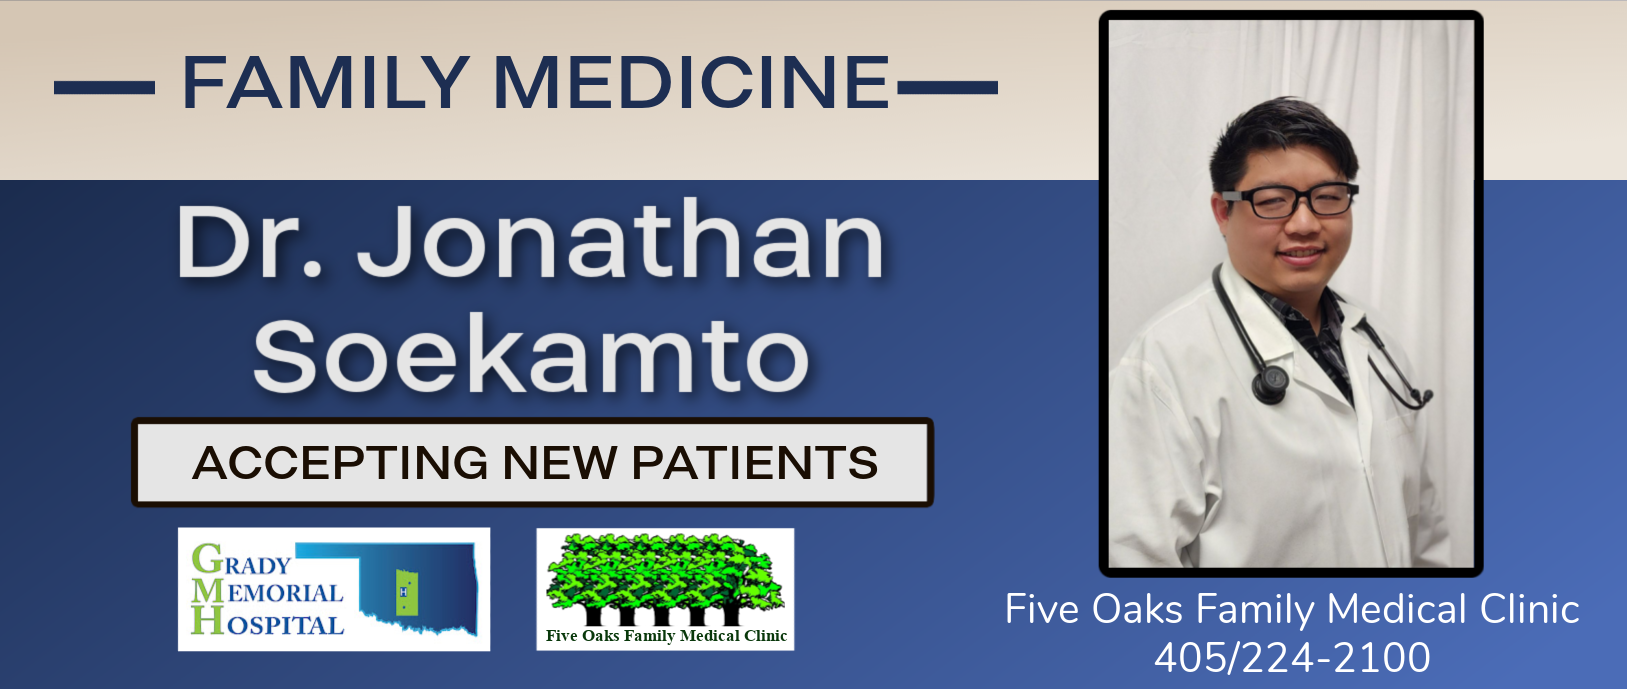 Dr. Soekamto- New Family Medicine Physician
Five Oaks Family Medical Center
( ACEEPTING NEW PATIENTS ) 
405-224-2100